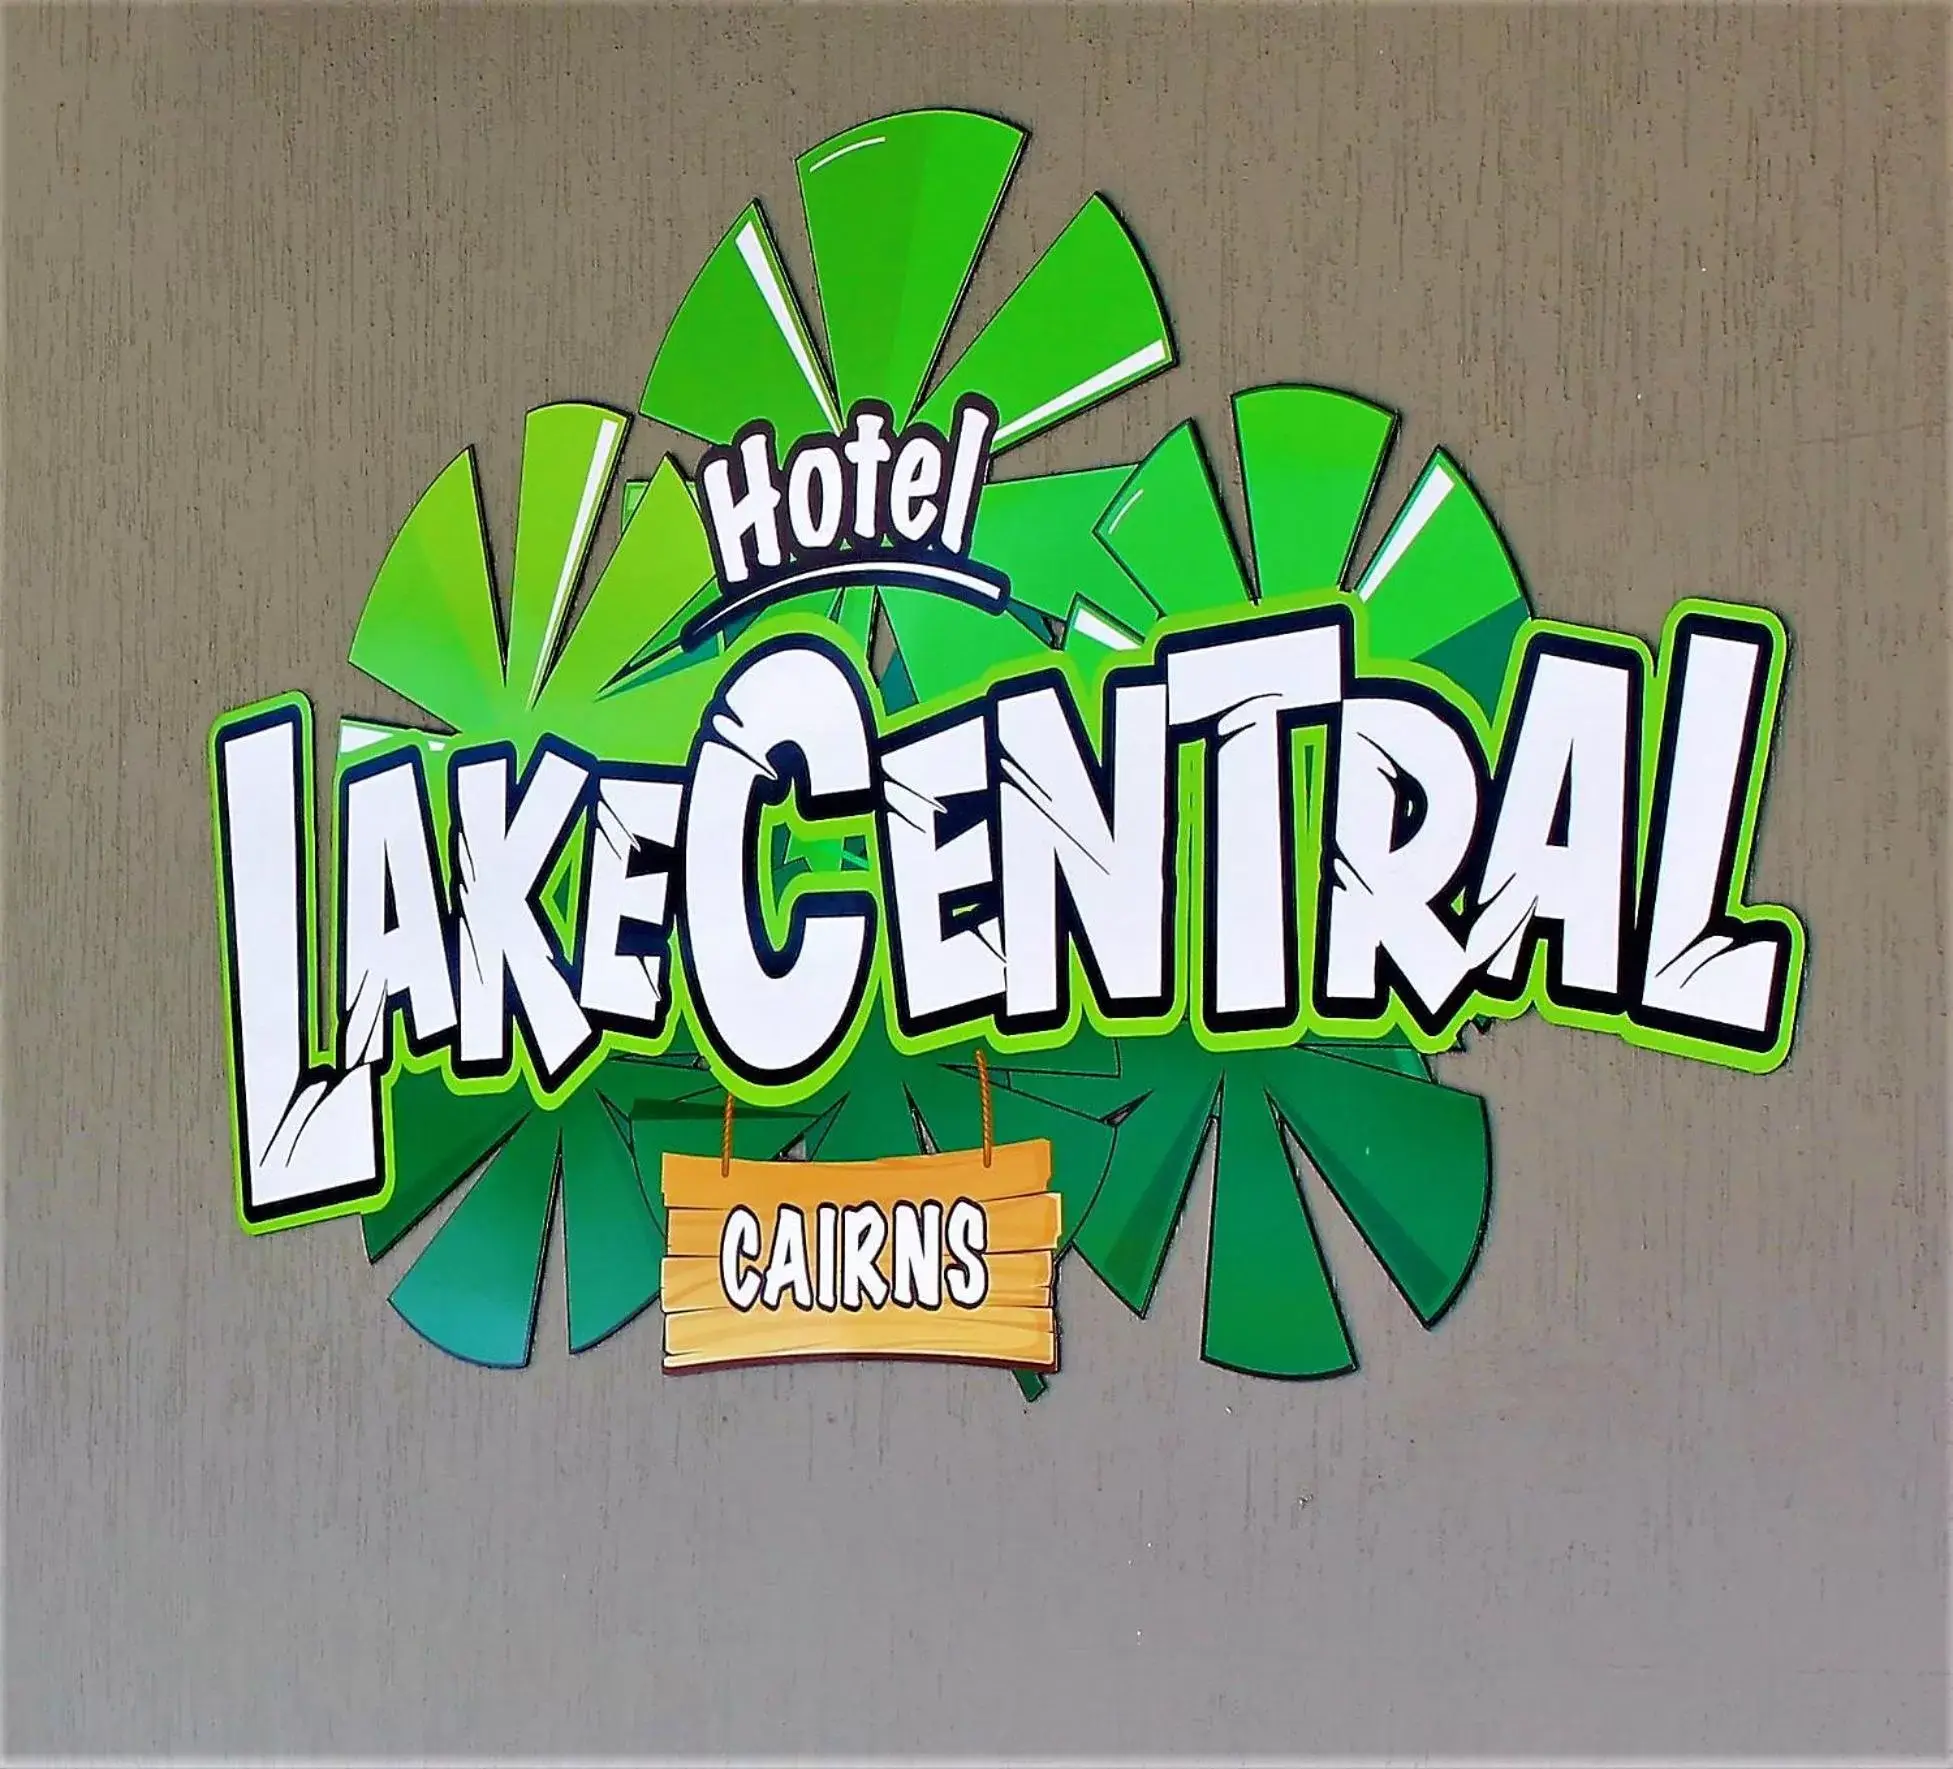 Property logo or sign in Lake Central Cairns